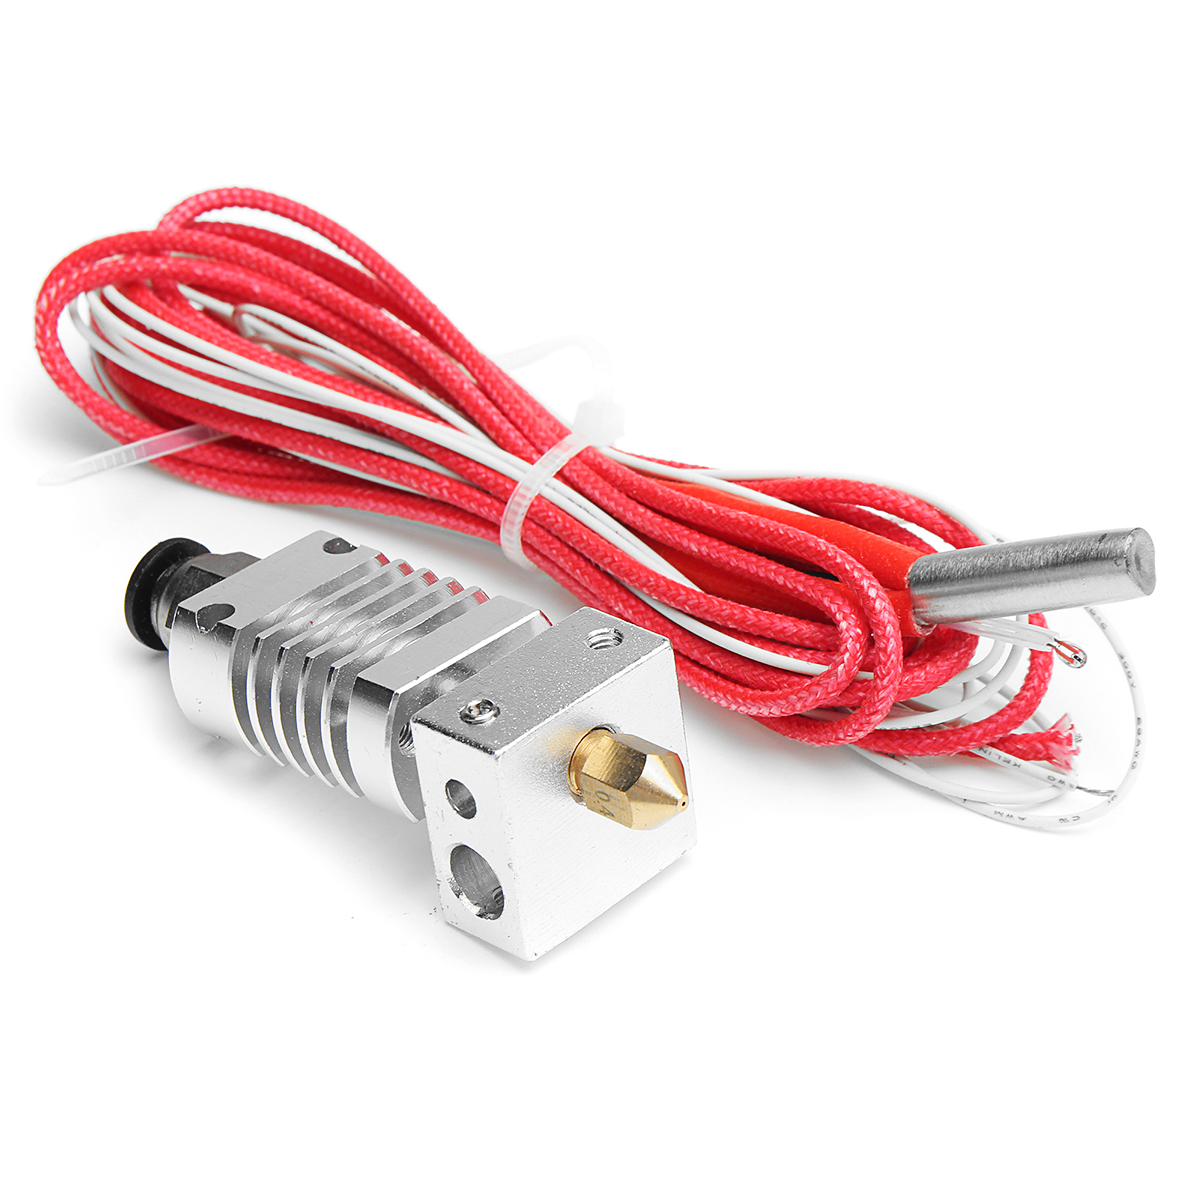 V6 1.75mm All Metal J-Head Hotend Remote Extruder Kit with Heating tube for CR10 3D Printer 11